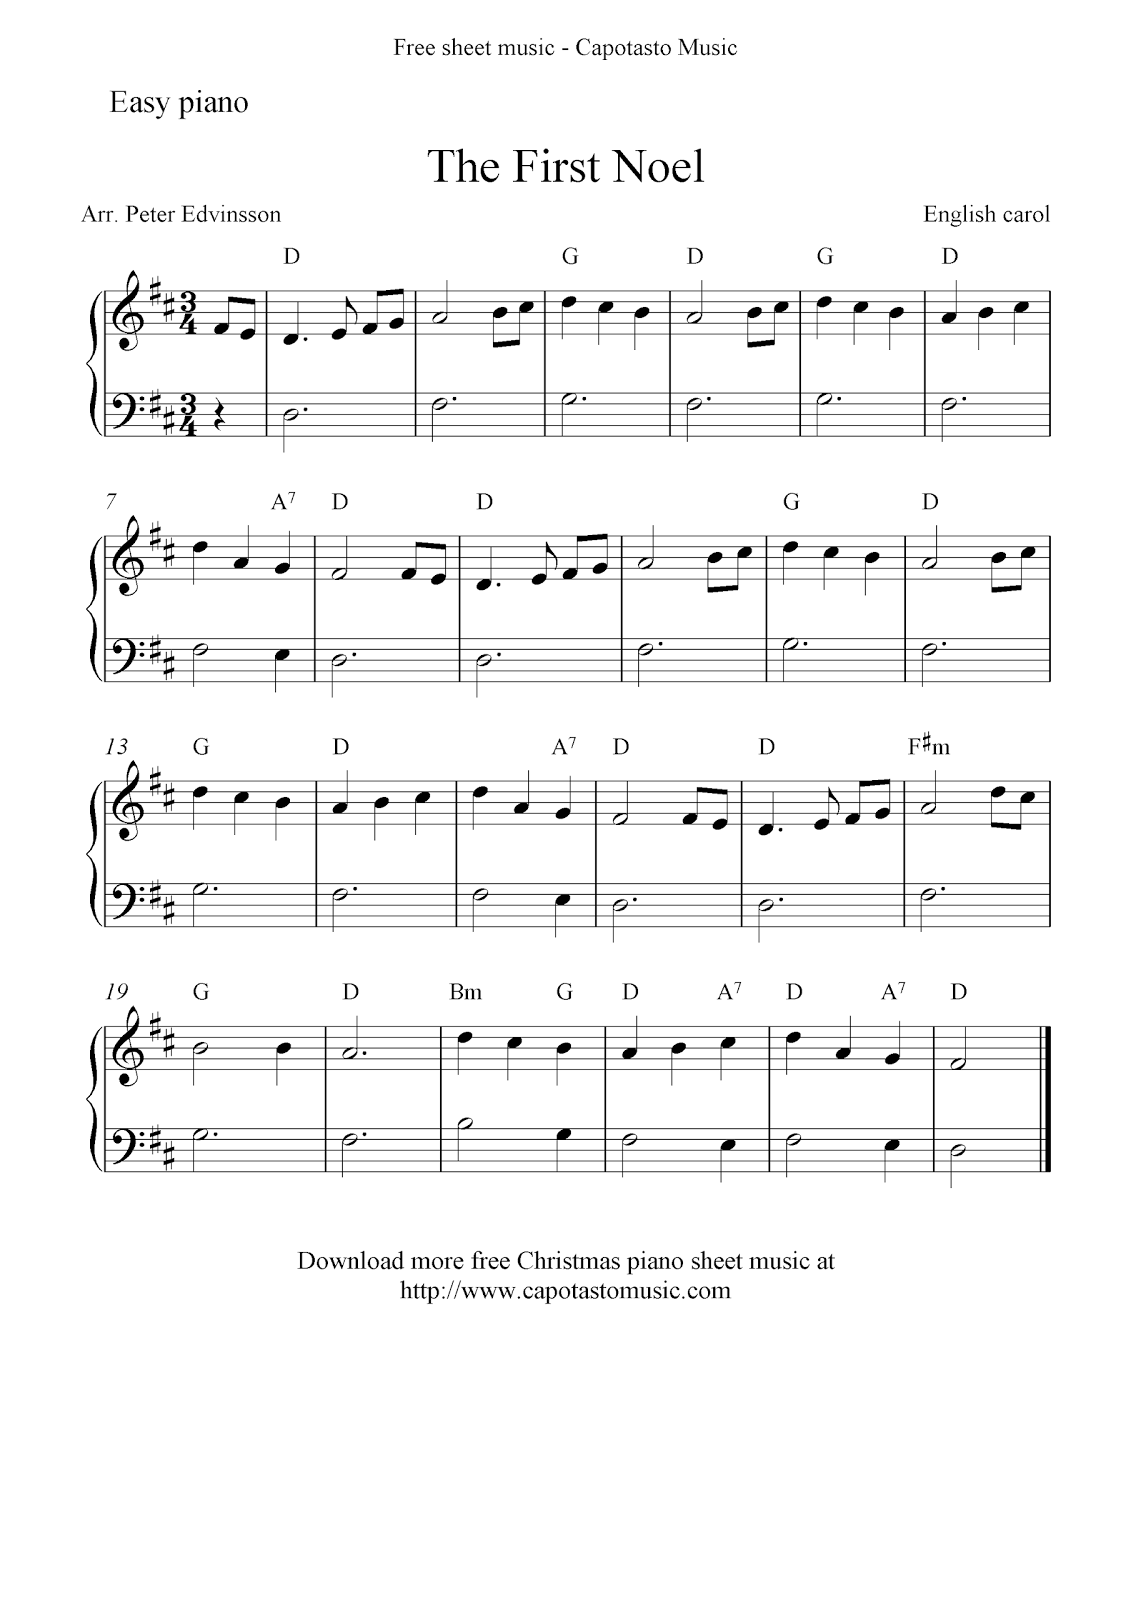 Easy free Christmas sheet music for piano, The First Noel